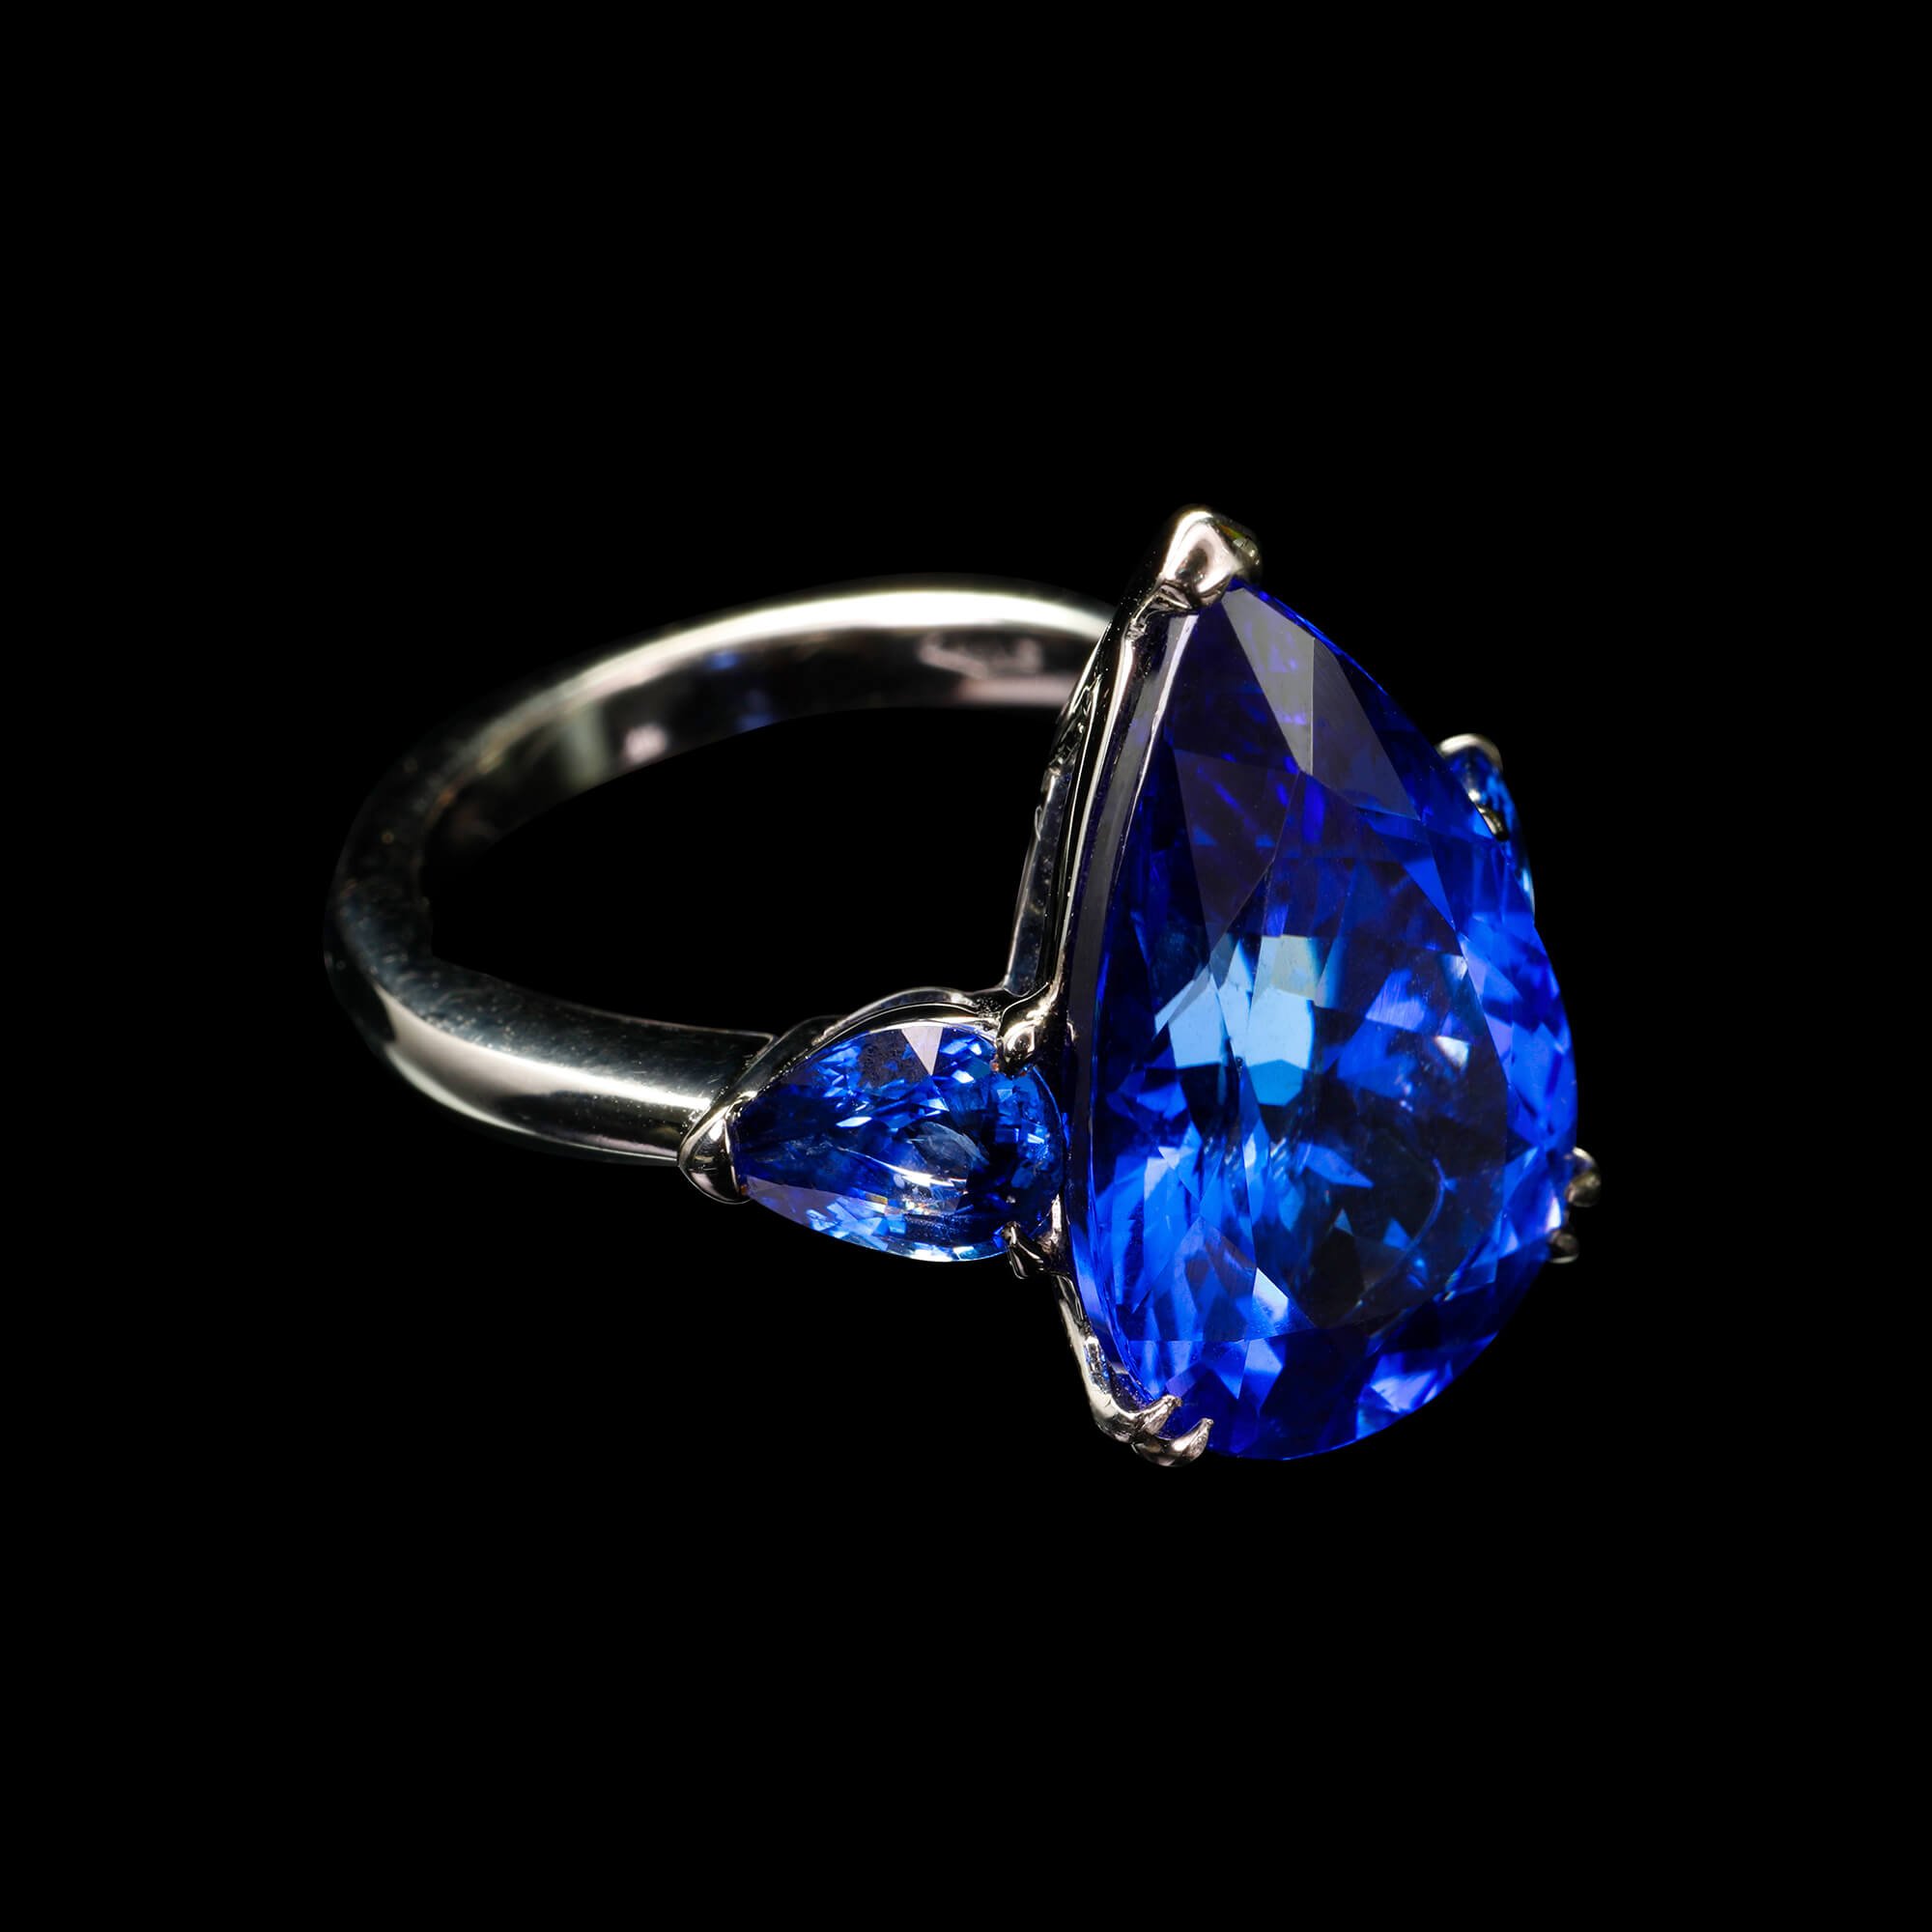 One-of-a-kind ring in 18kt gold with black rhodium with pear-shaped tanzanite and blue sapphires. FRIDA | Fine Jewellery.jpg